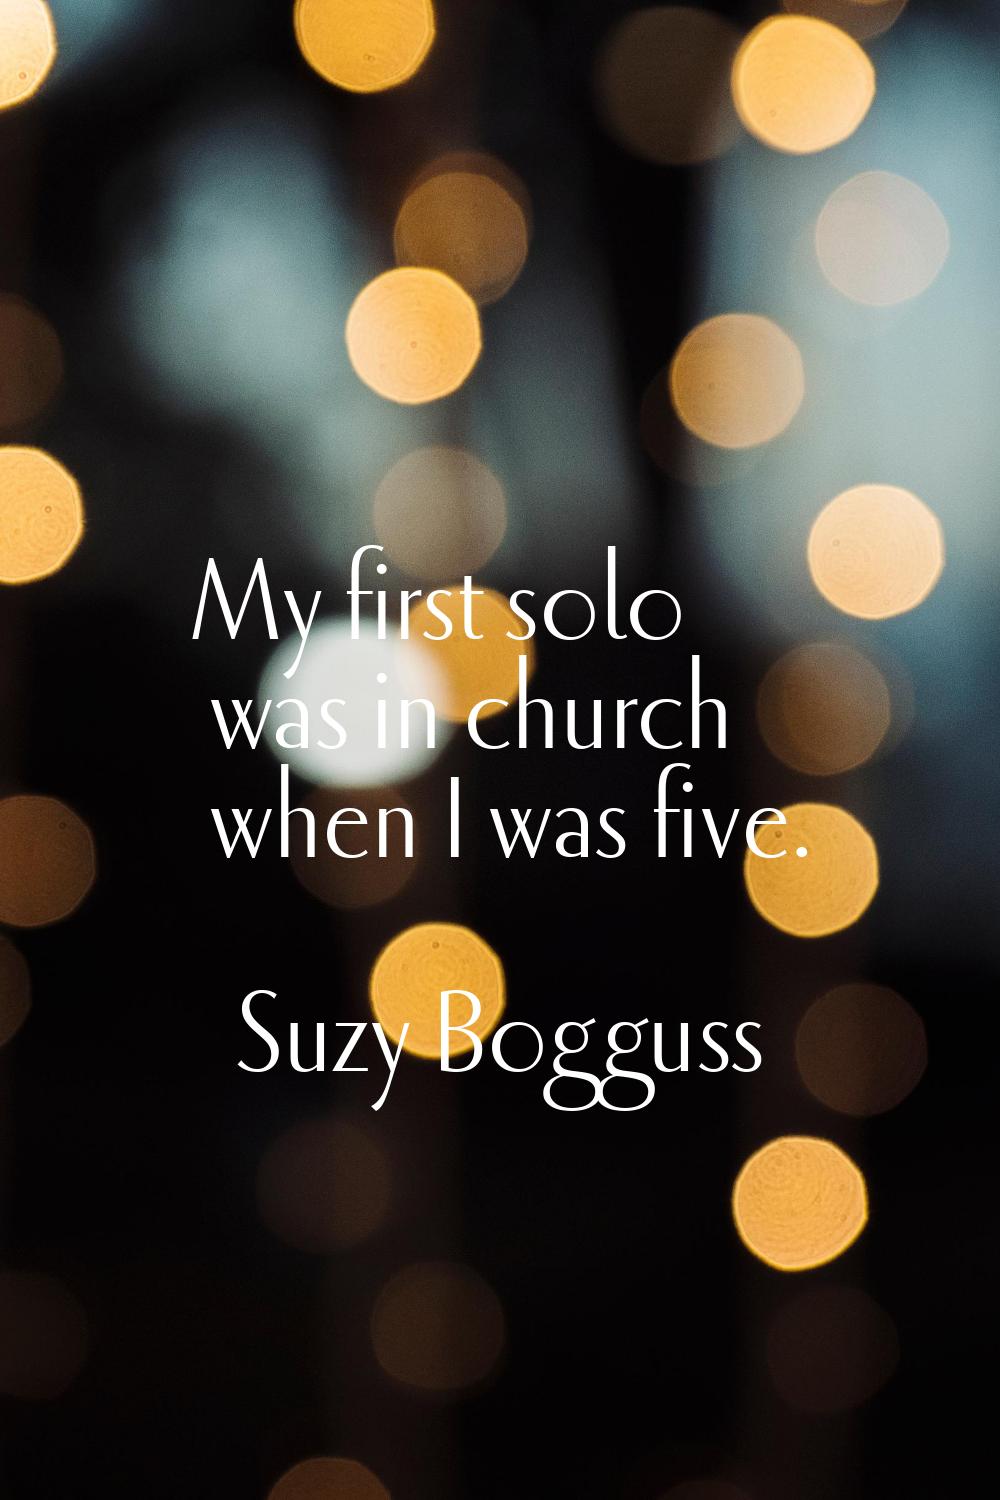 My first solo was in church when I was five.